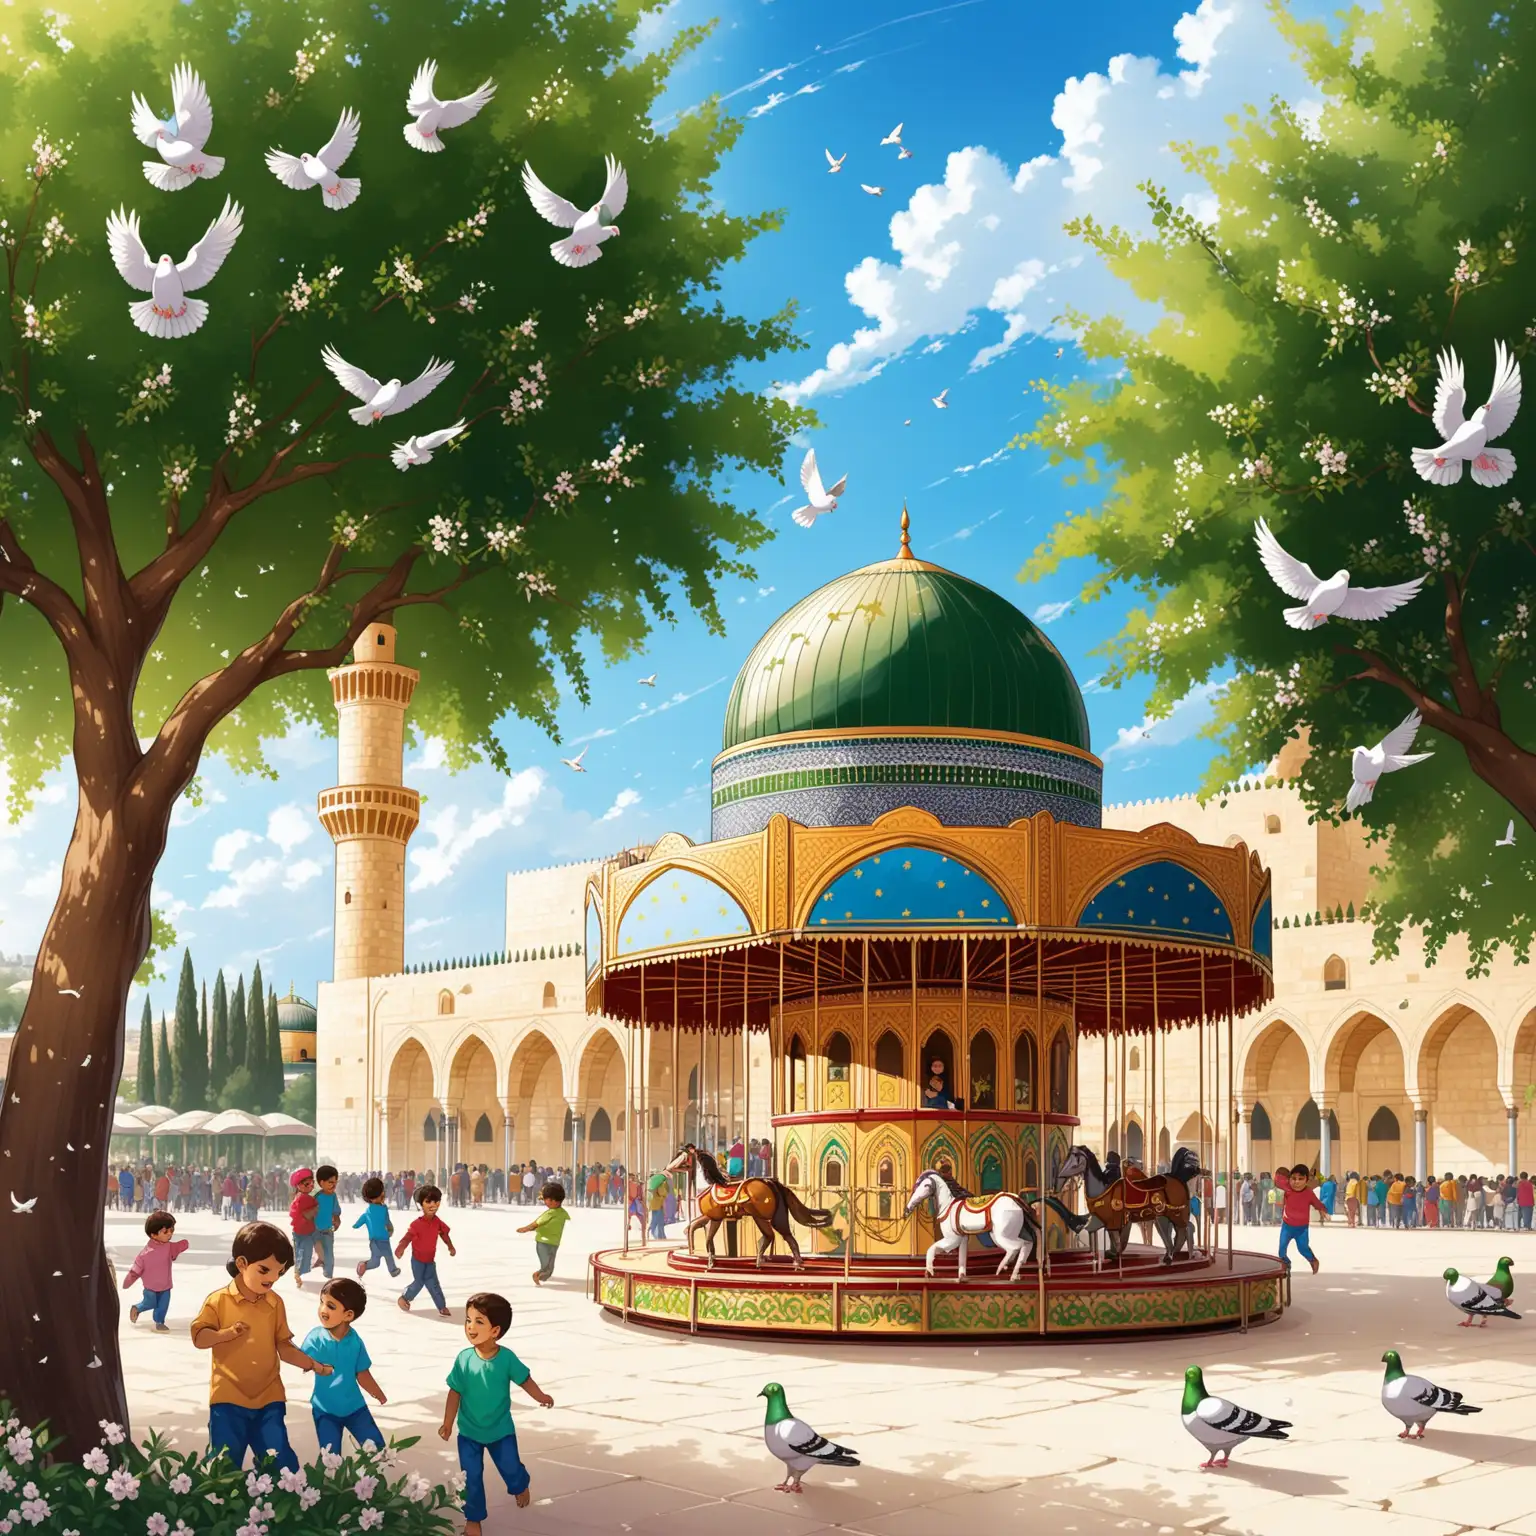 Joyful Children Playing in AlAqsa Mosque Gardens with Pigeons and Olive Trees